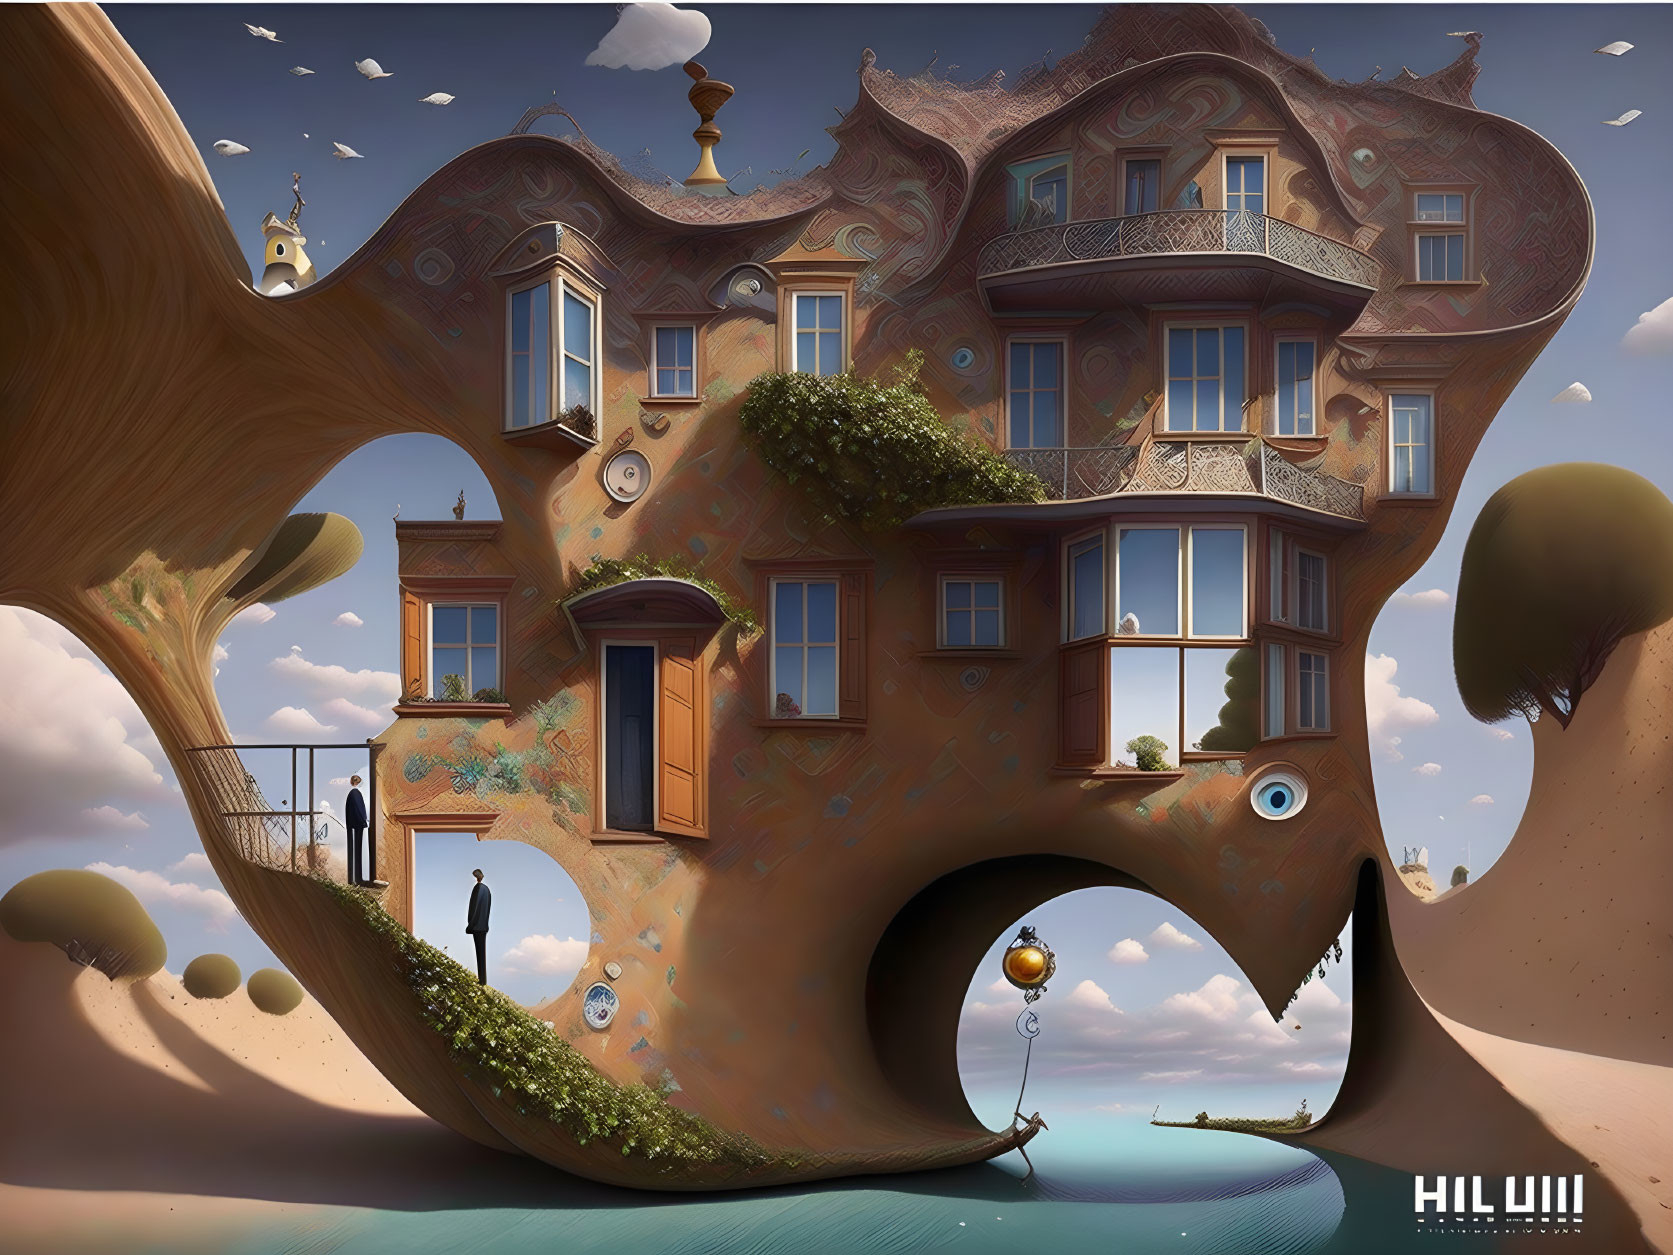 Whimsical surreal treehouse with floating islands and fishing person